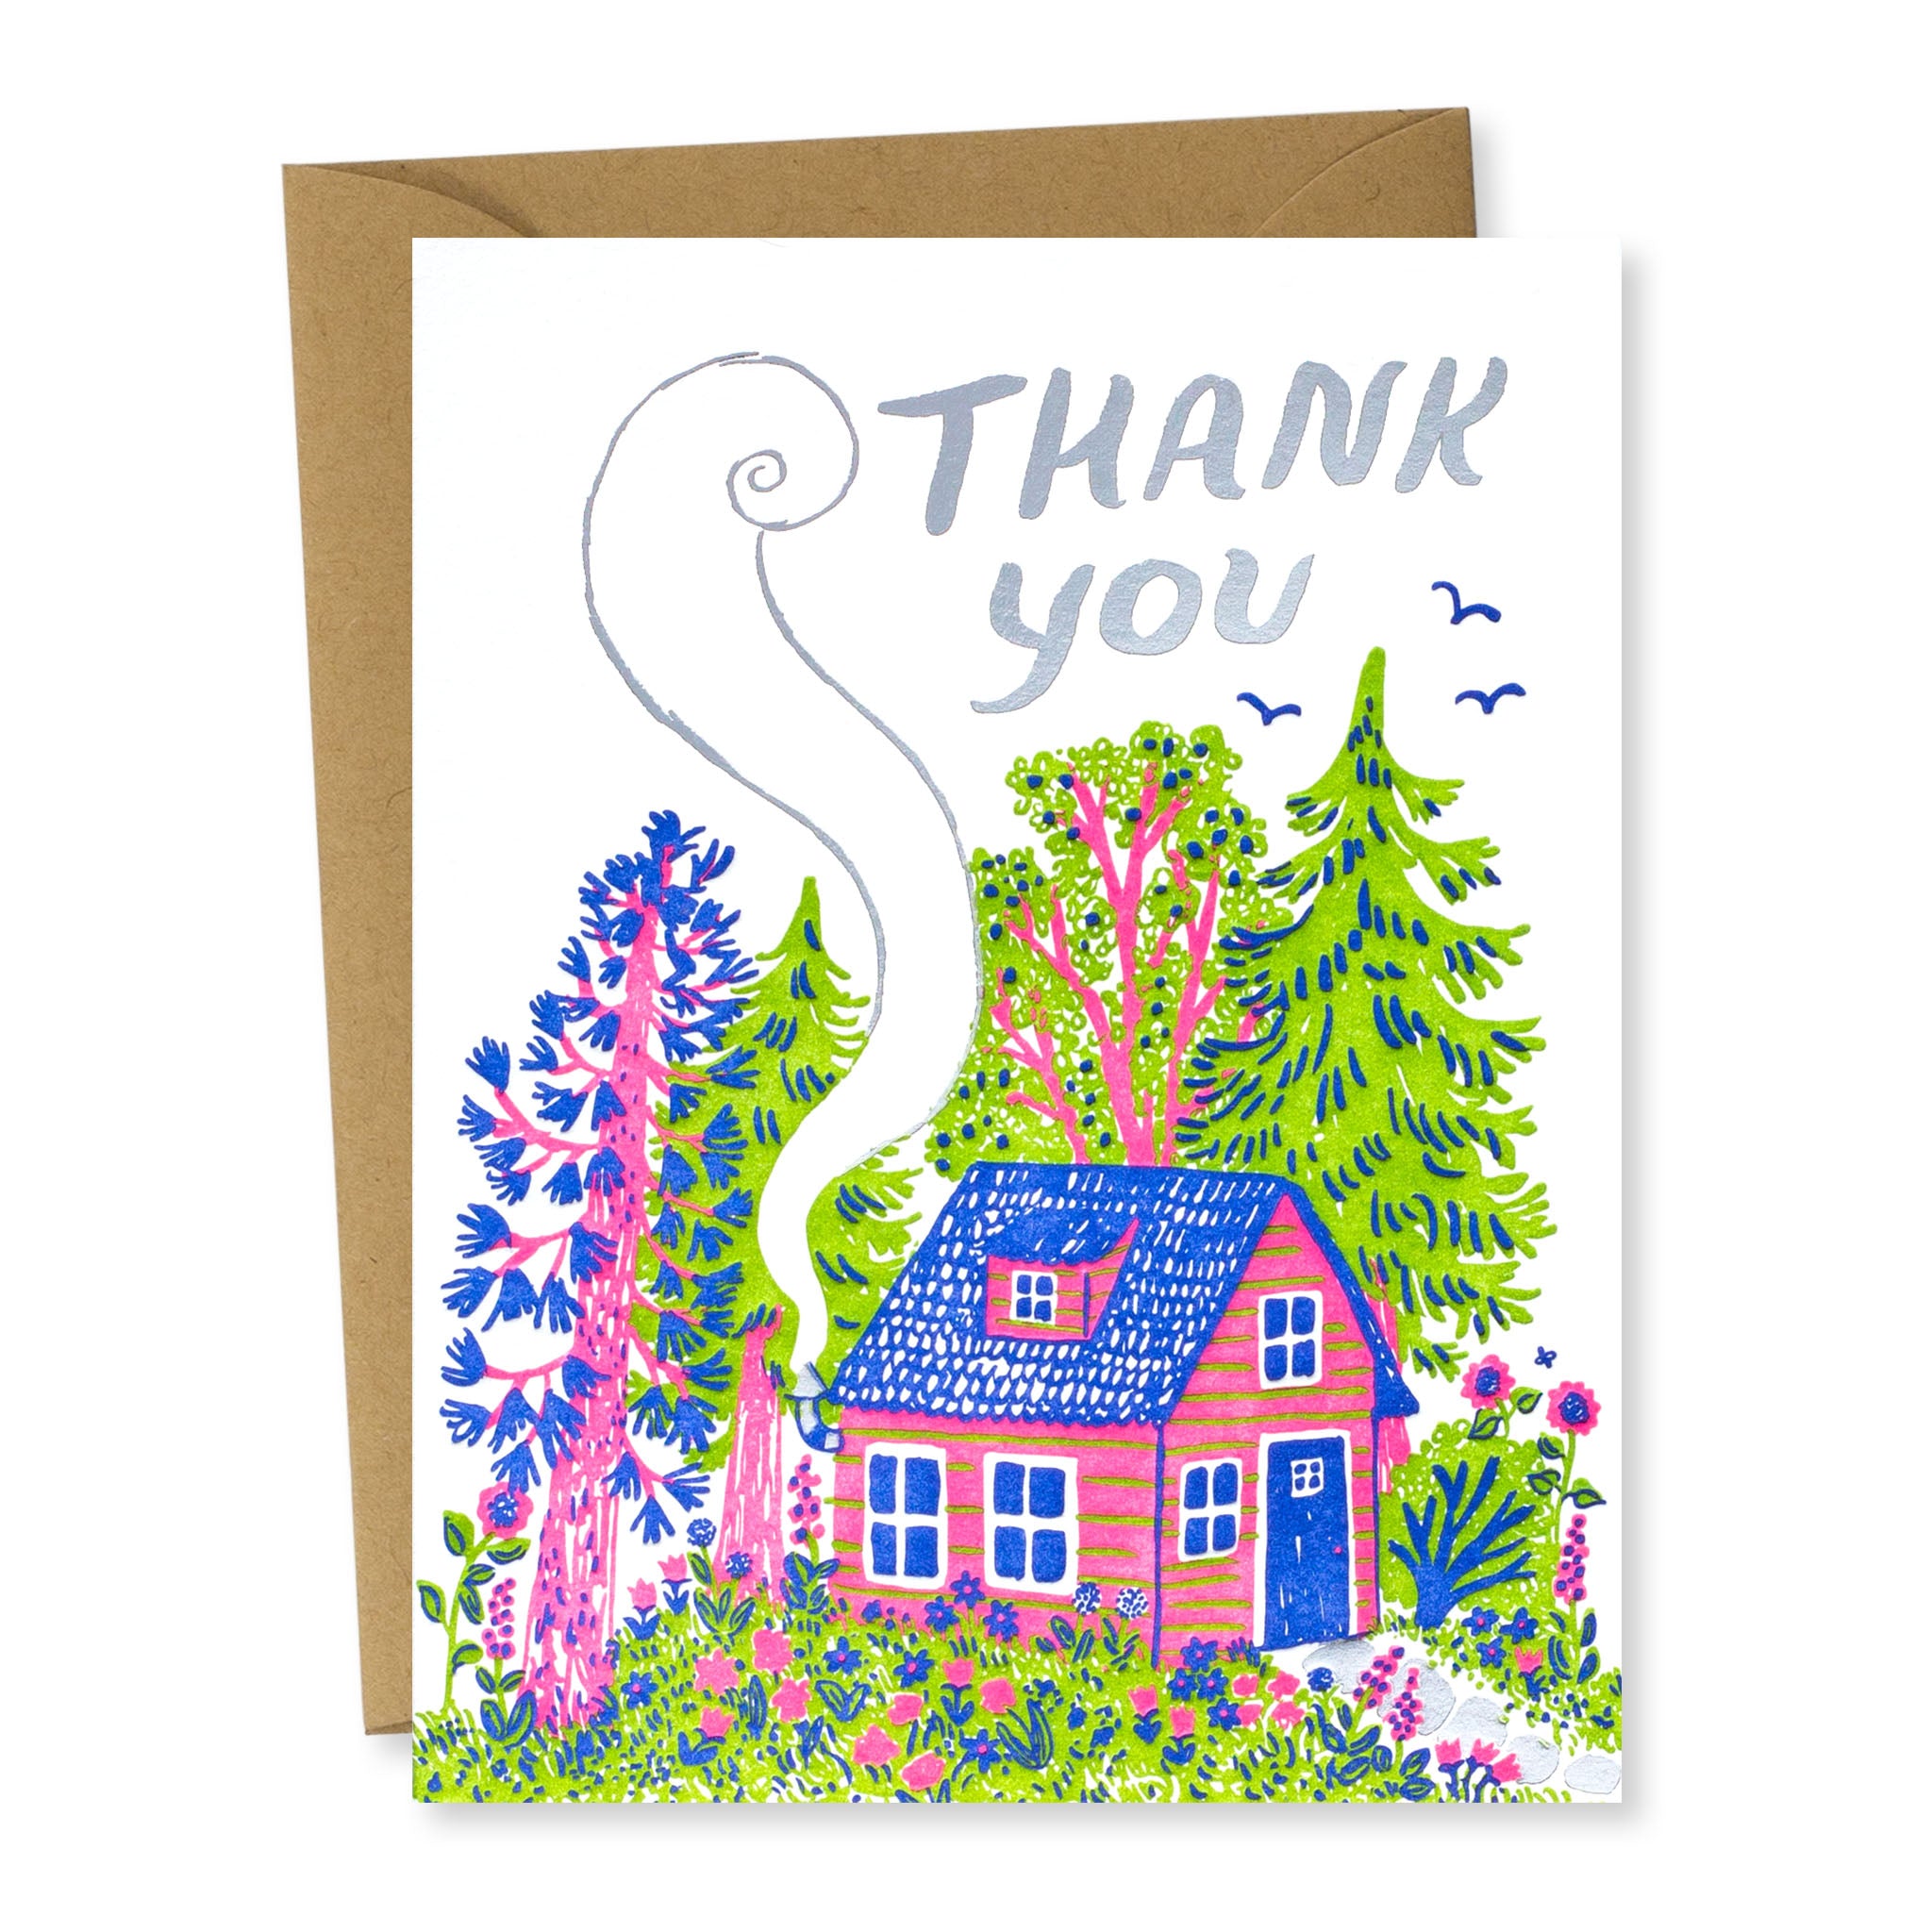 Phoebe Wahl: Thank you Cottage